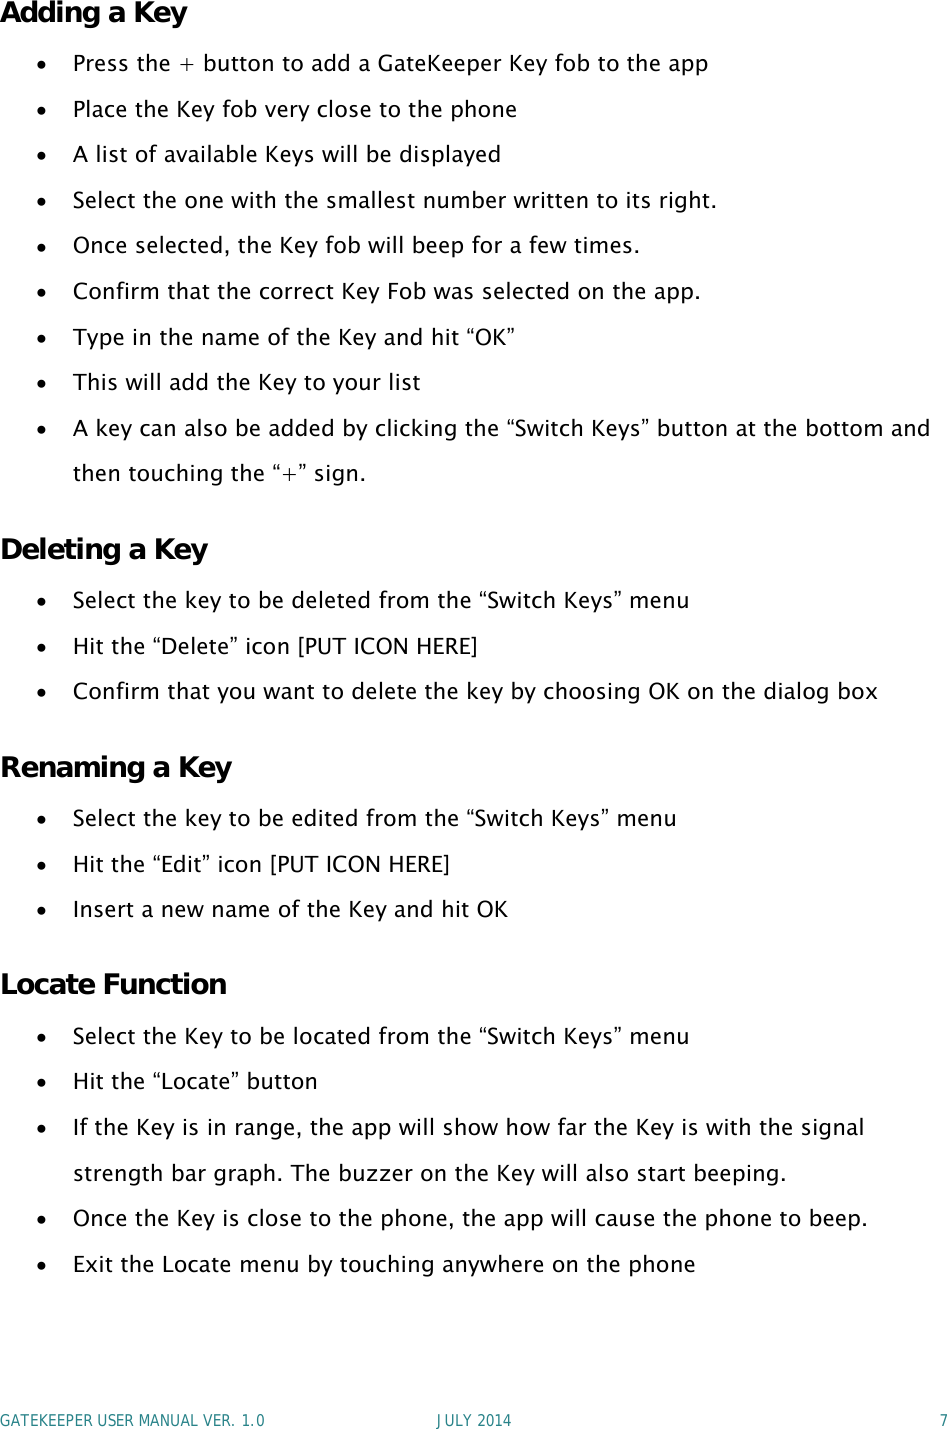 GATEKEEPER USER MANUAL VER. 1.0 JULY 2014 7Adding a KeyPress the + button to add a GateKeeper Key fob to the appPlace the Key fob very close to the phoneA list of available Keys will be displayedSelect the one with the smallest number written to its right.Once selected, the Key fob will beep for a few times.Confirm that the correct Key Fob was selected on the app.Type in the name of the Key and hit “OK”This will add the Key to your listA key can also be added by clicking the “Switch Keys” button at the bottom andthen touching the “+” sign.Deleting a KeySelect the key to be deleted from the “Switch Keys” menuHit the “Delete” icon [PUT ICON HERE]Confirm that you want to delete the key by choosing OK on the dialog boxRenaming a KeySelect the key to be edited from the “Switch Keys” menuHit the “Edit” icon [PUT ICON HERE]Insert a new name of the Key and hit OKLocate FunctionSelect the Key to be located from the “Switch Keys” menuHit the “Locate” buttonIf the Key is in range, the app will show how far the Key is with the signalstrength bar graph. The buzzer on the Key will also start beeping.Once the Key is close to the phone, the app will cause the phone to beep.Exit the Locate menu by touching anywhere on the phone